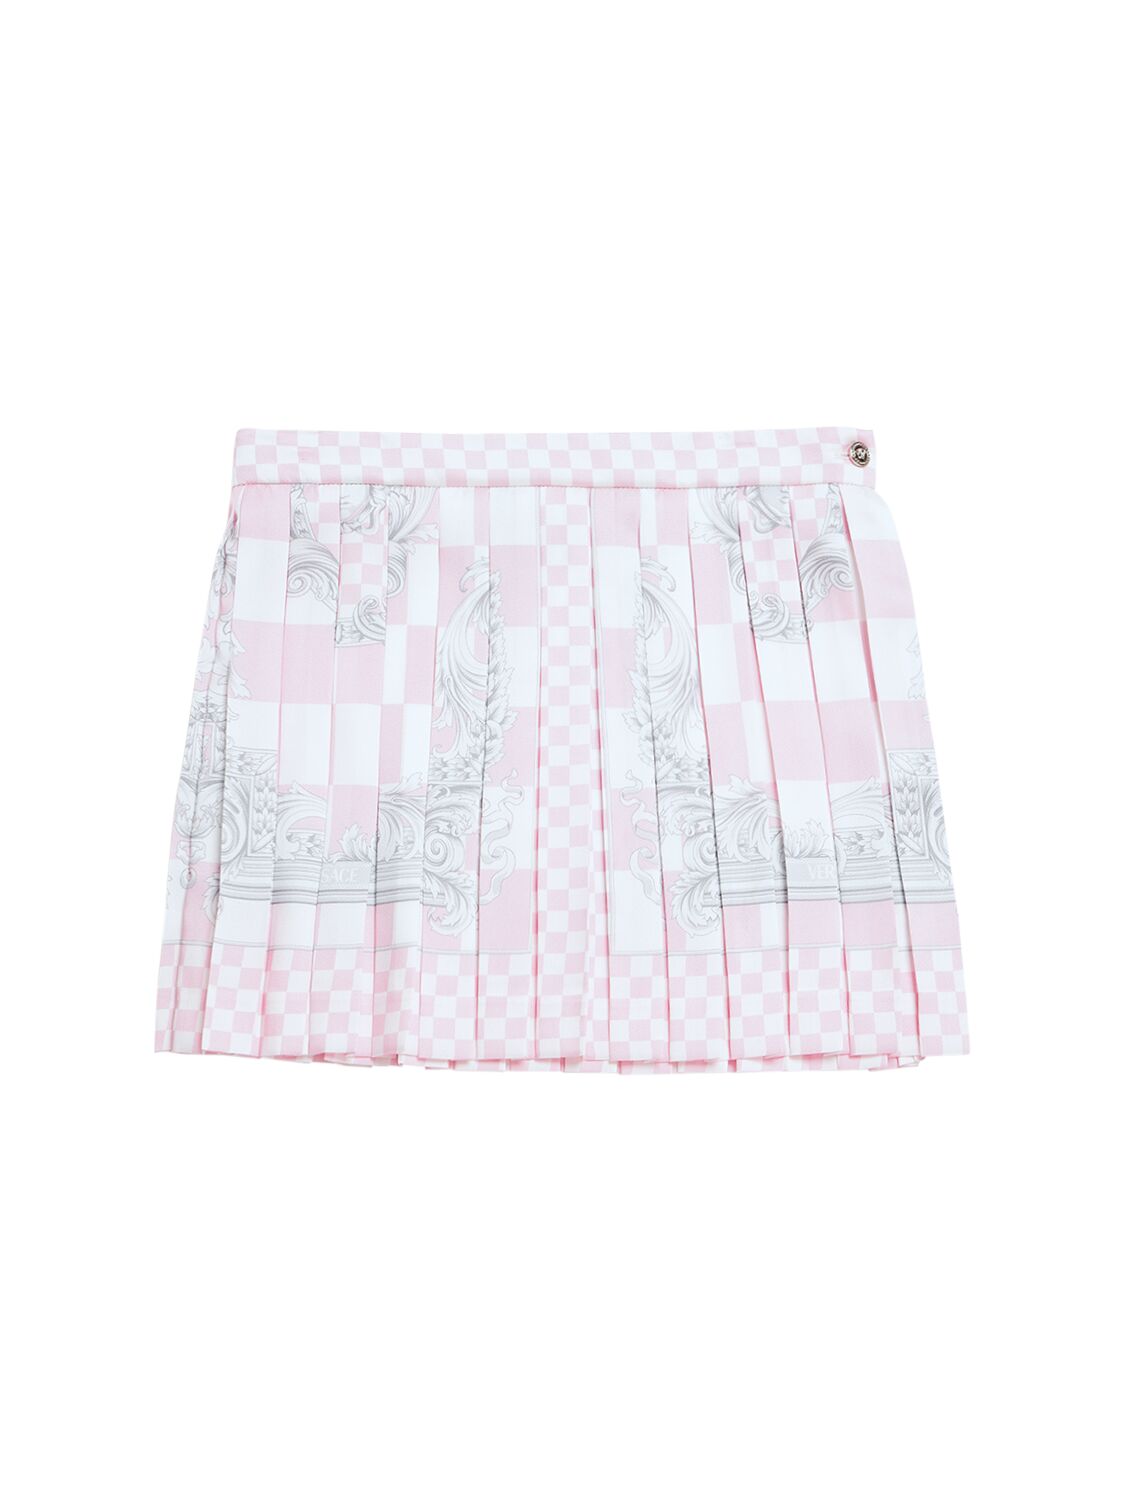 Image of Printed Cotton Twill Skirt